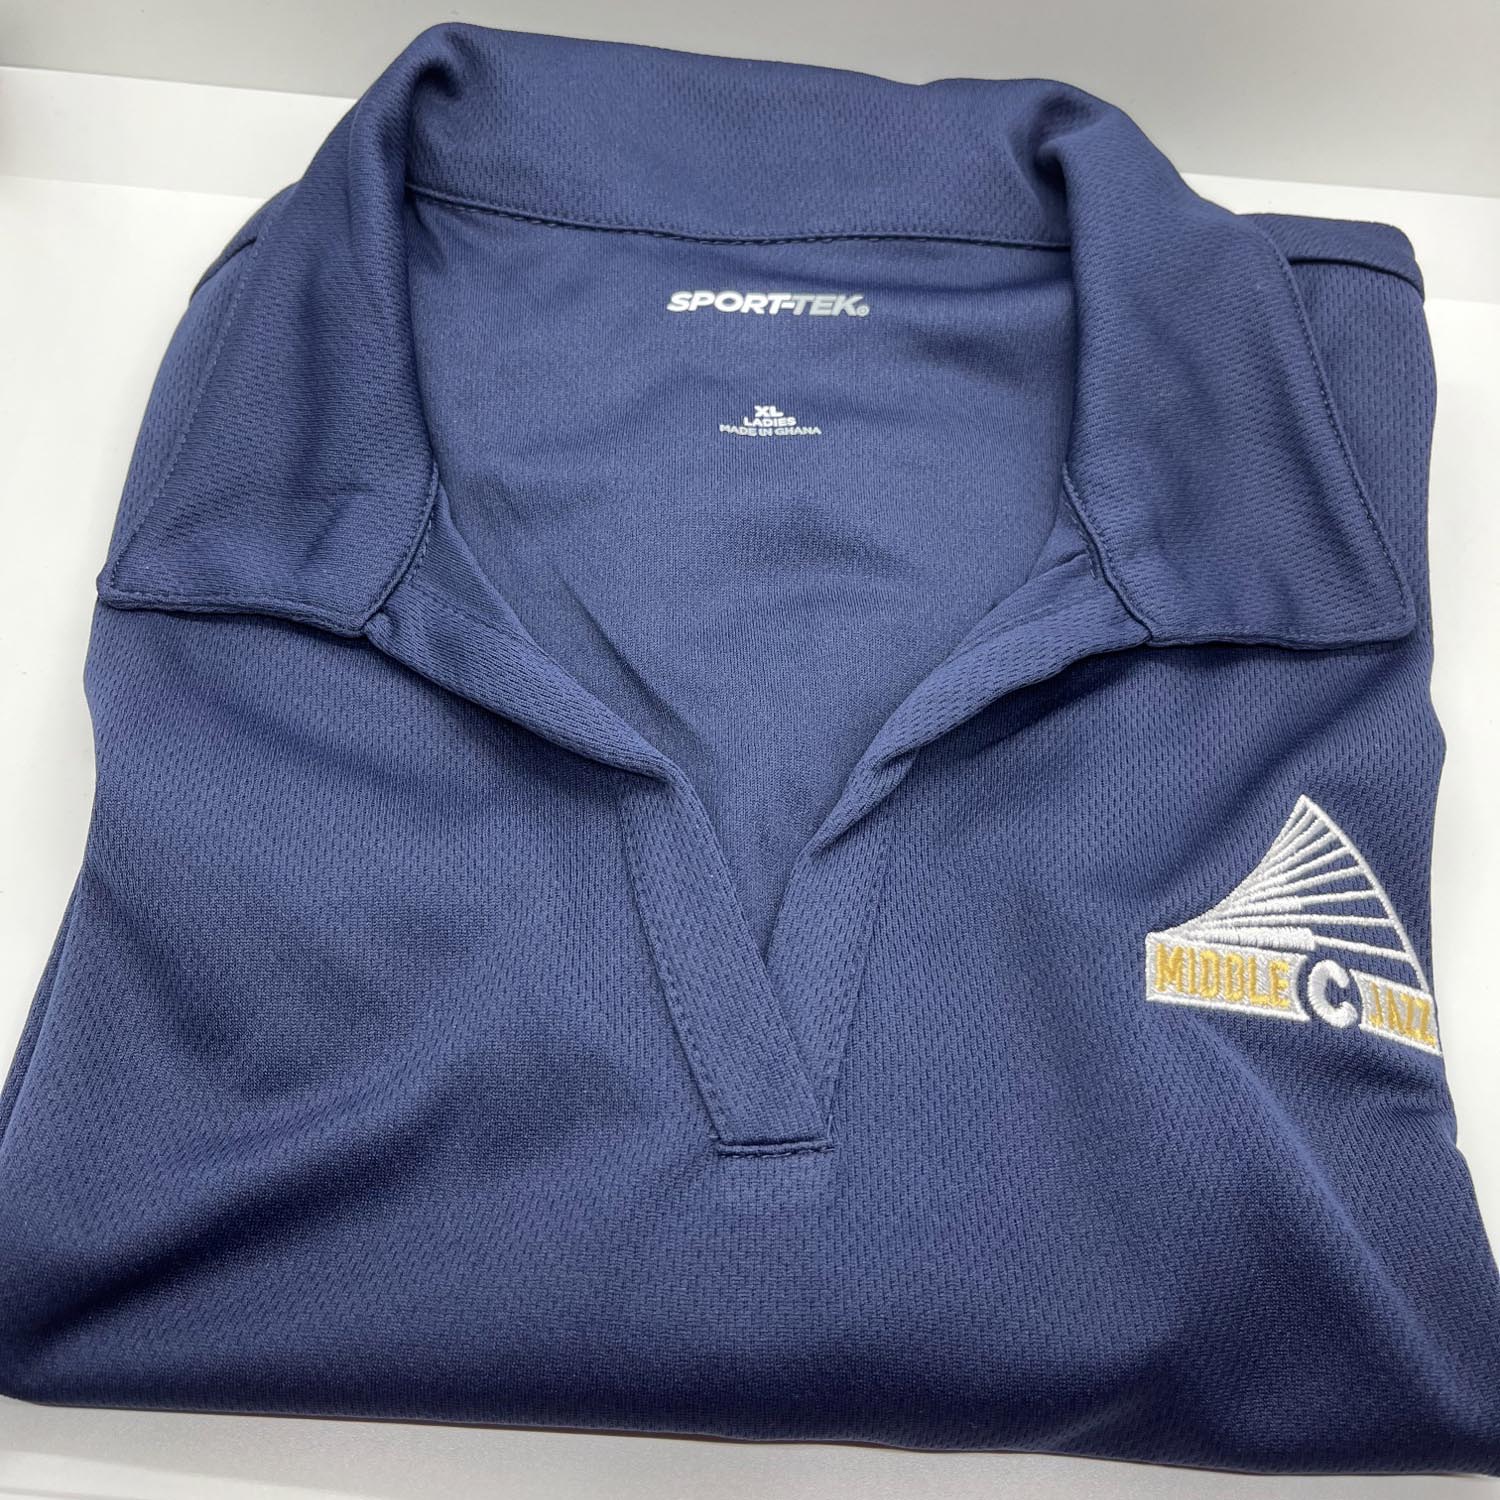 Women's Blue Polo with Middle C Jazz